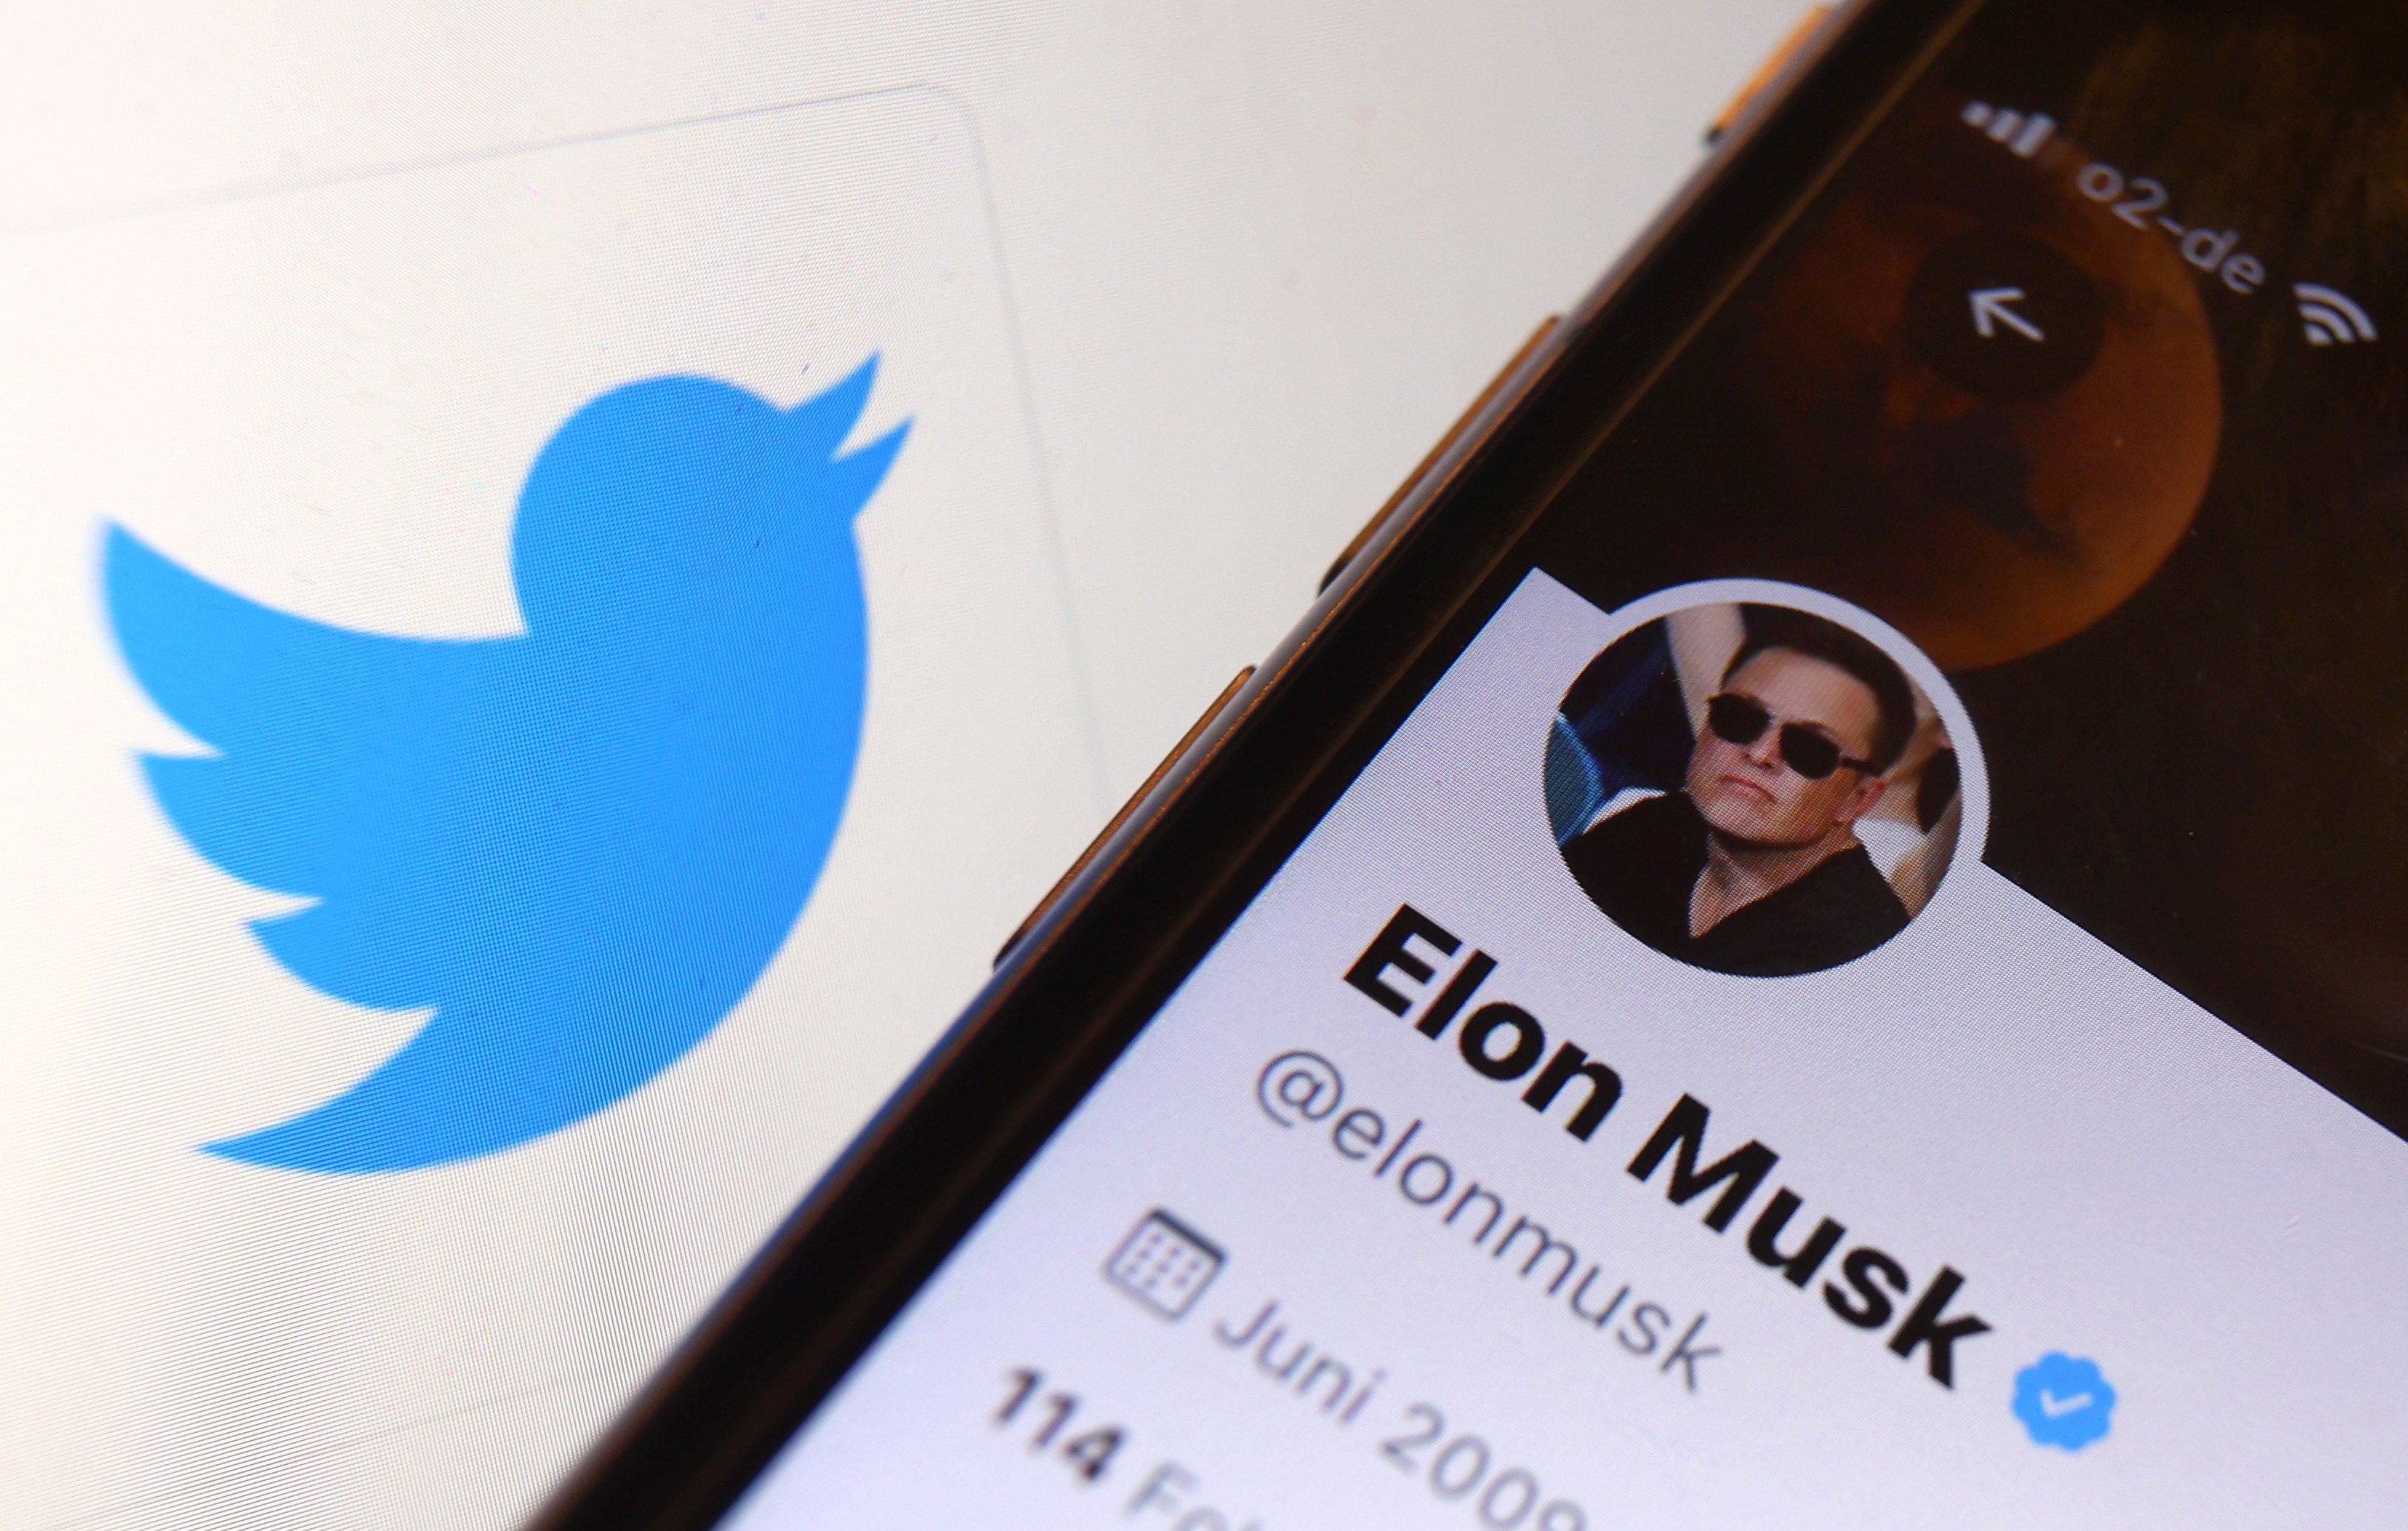 Elon Musk has generated a series of controversies since he bought Twitter in October. Photo: dpa